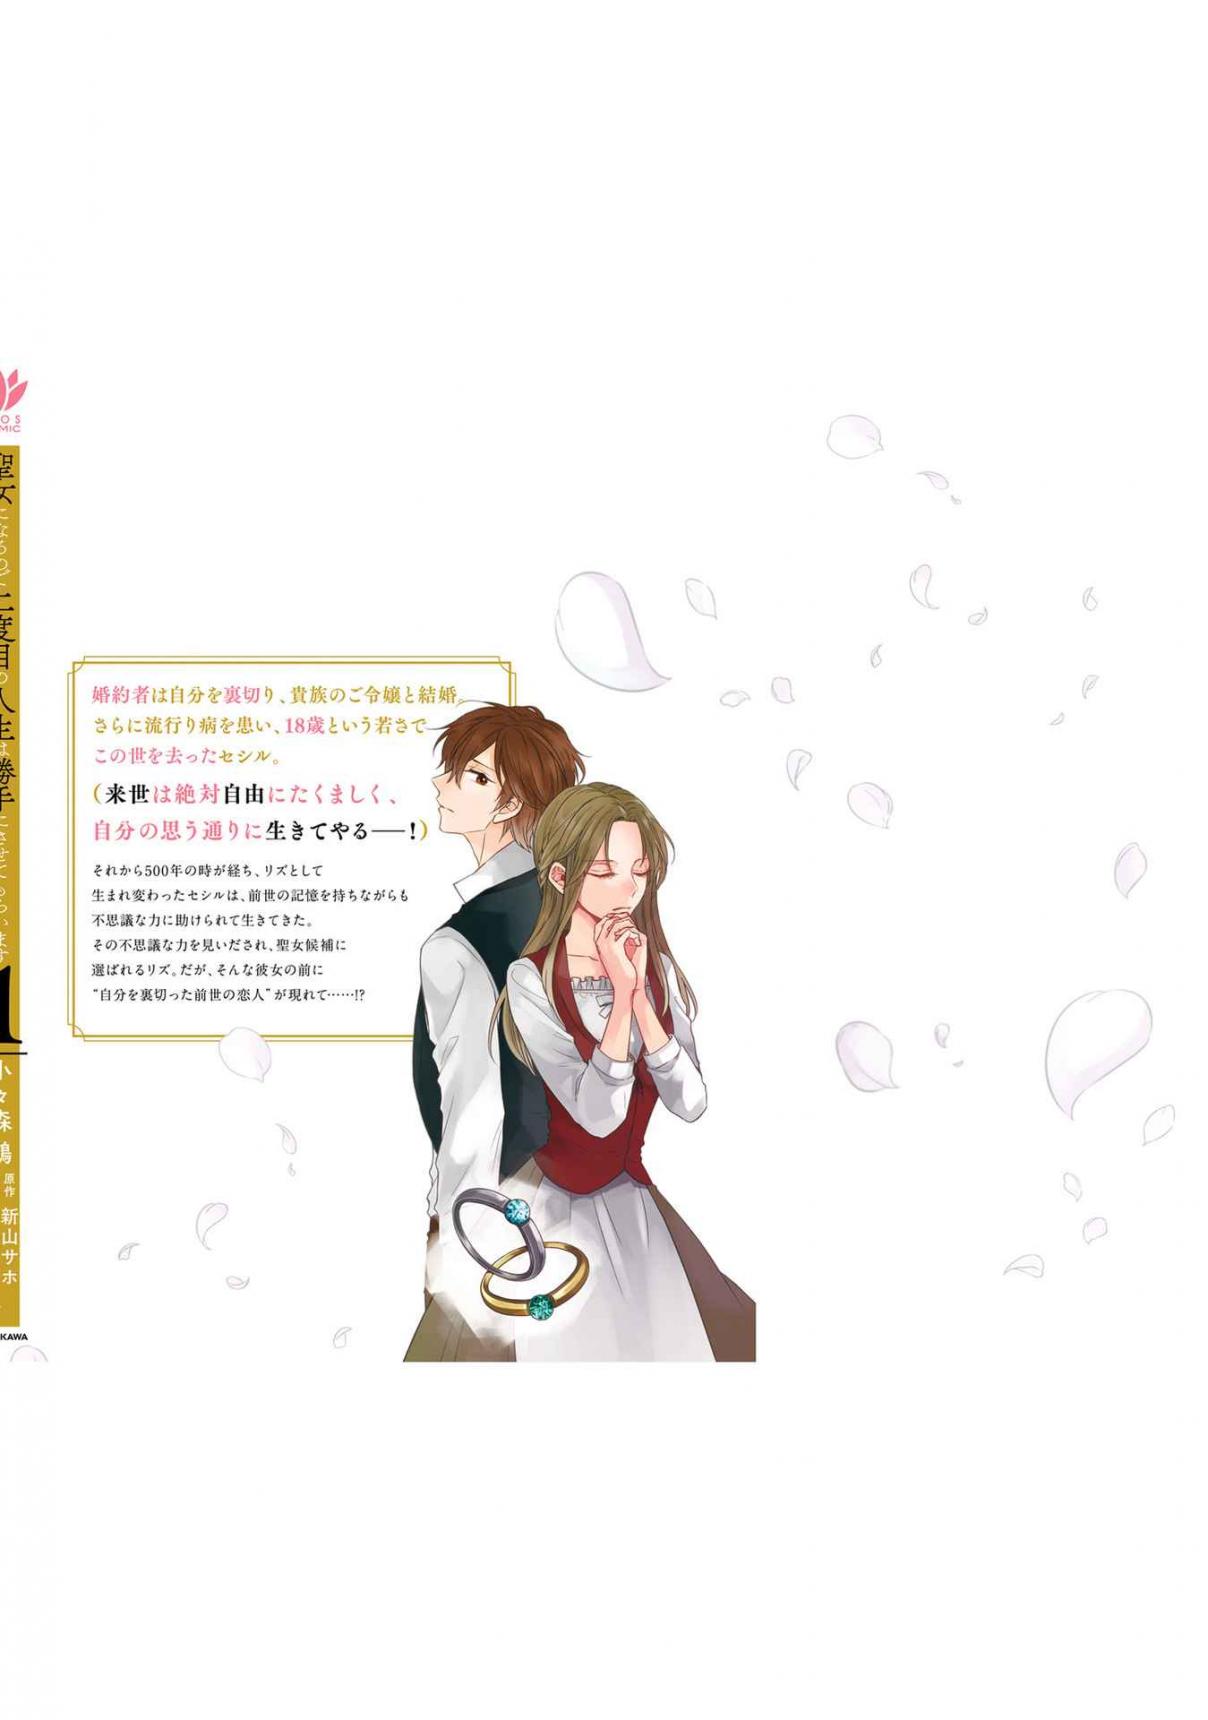 Since I Became a Saint, I'll Do Whatever I Want with My Second Life ~The Prince Was My Lover Who Threw Me Away in My Previous Life~ Vol. 1 Ch. 4.5